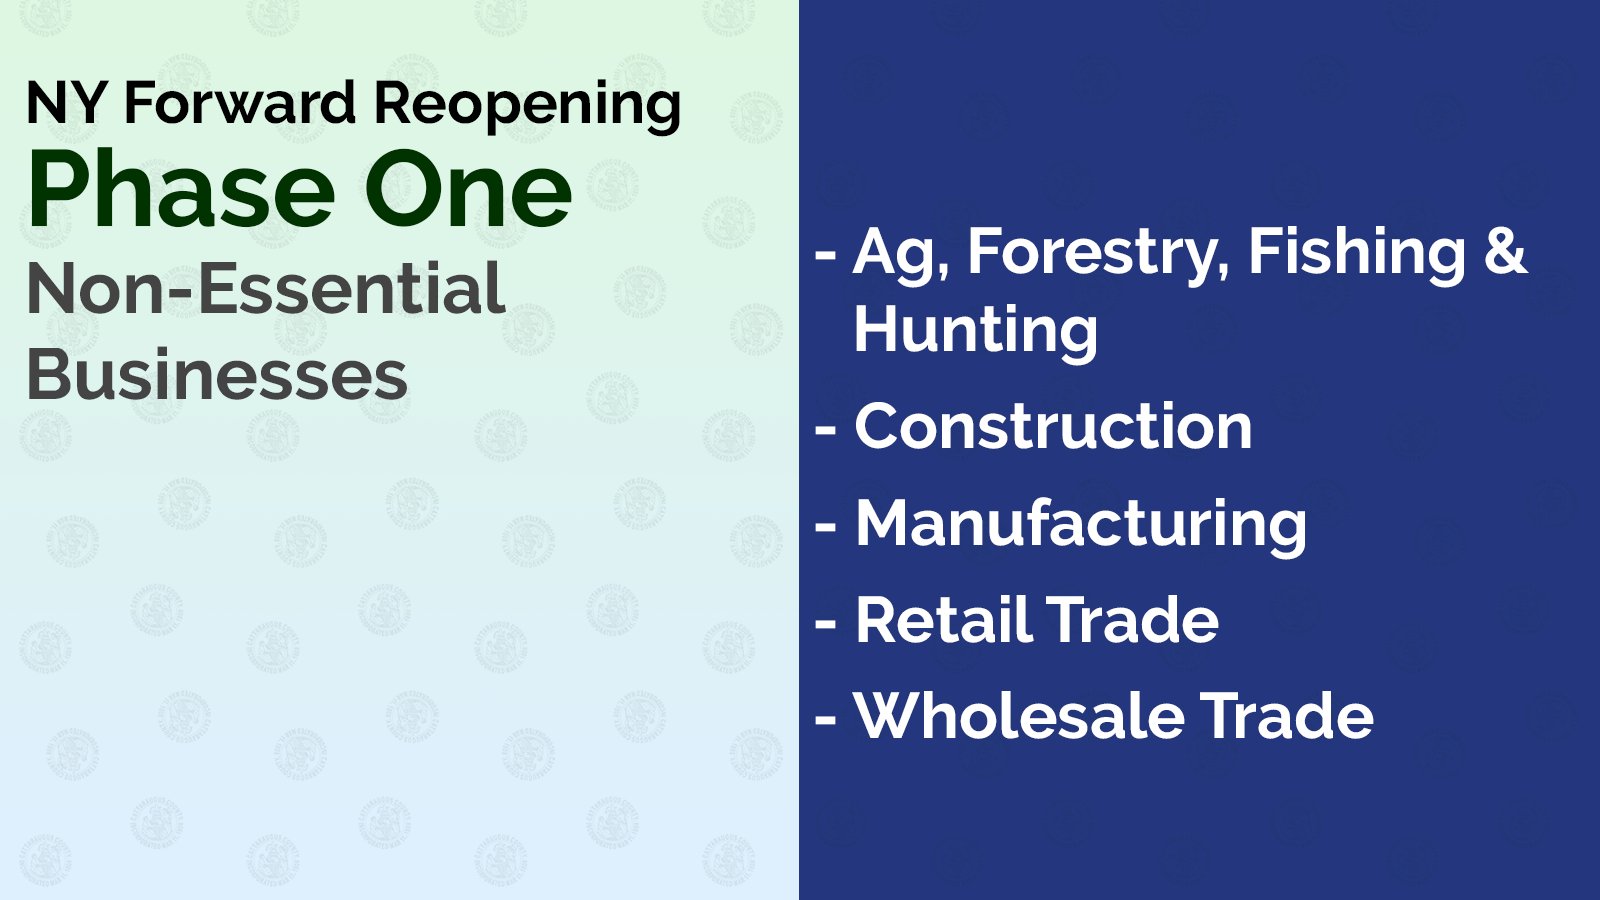 NY Forward Reopening Phase One: Non-Essential Businesses: - Ag, Forestry, Fishing & Hunting - Construction - Manufacturing - Retail Trade - Wholesale Trade